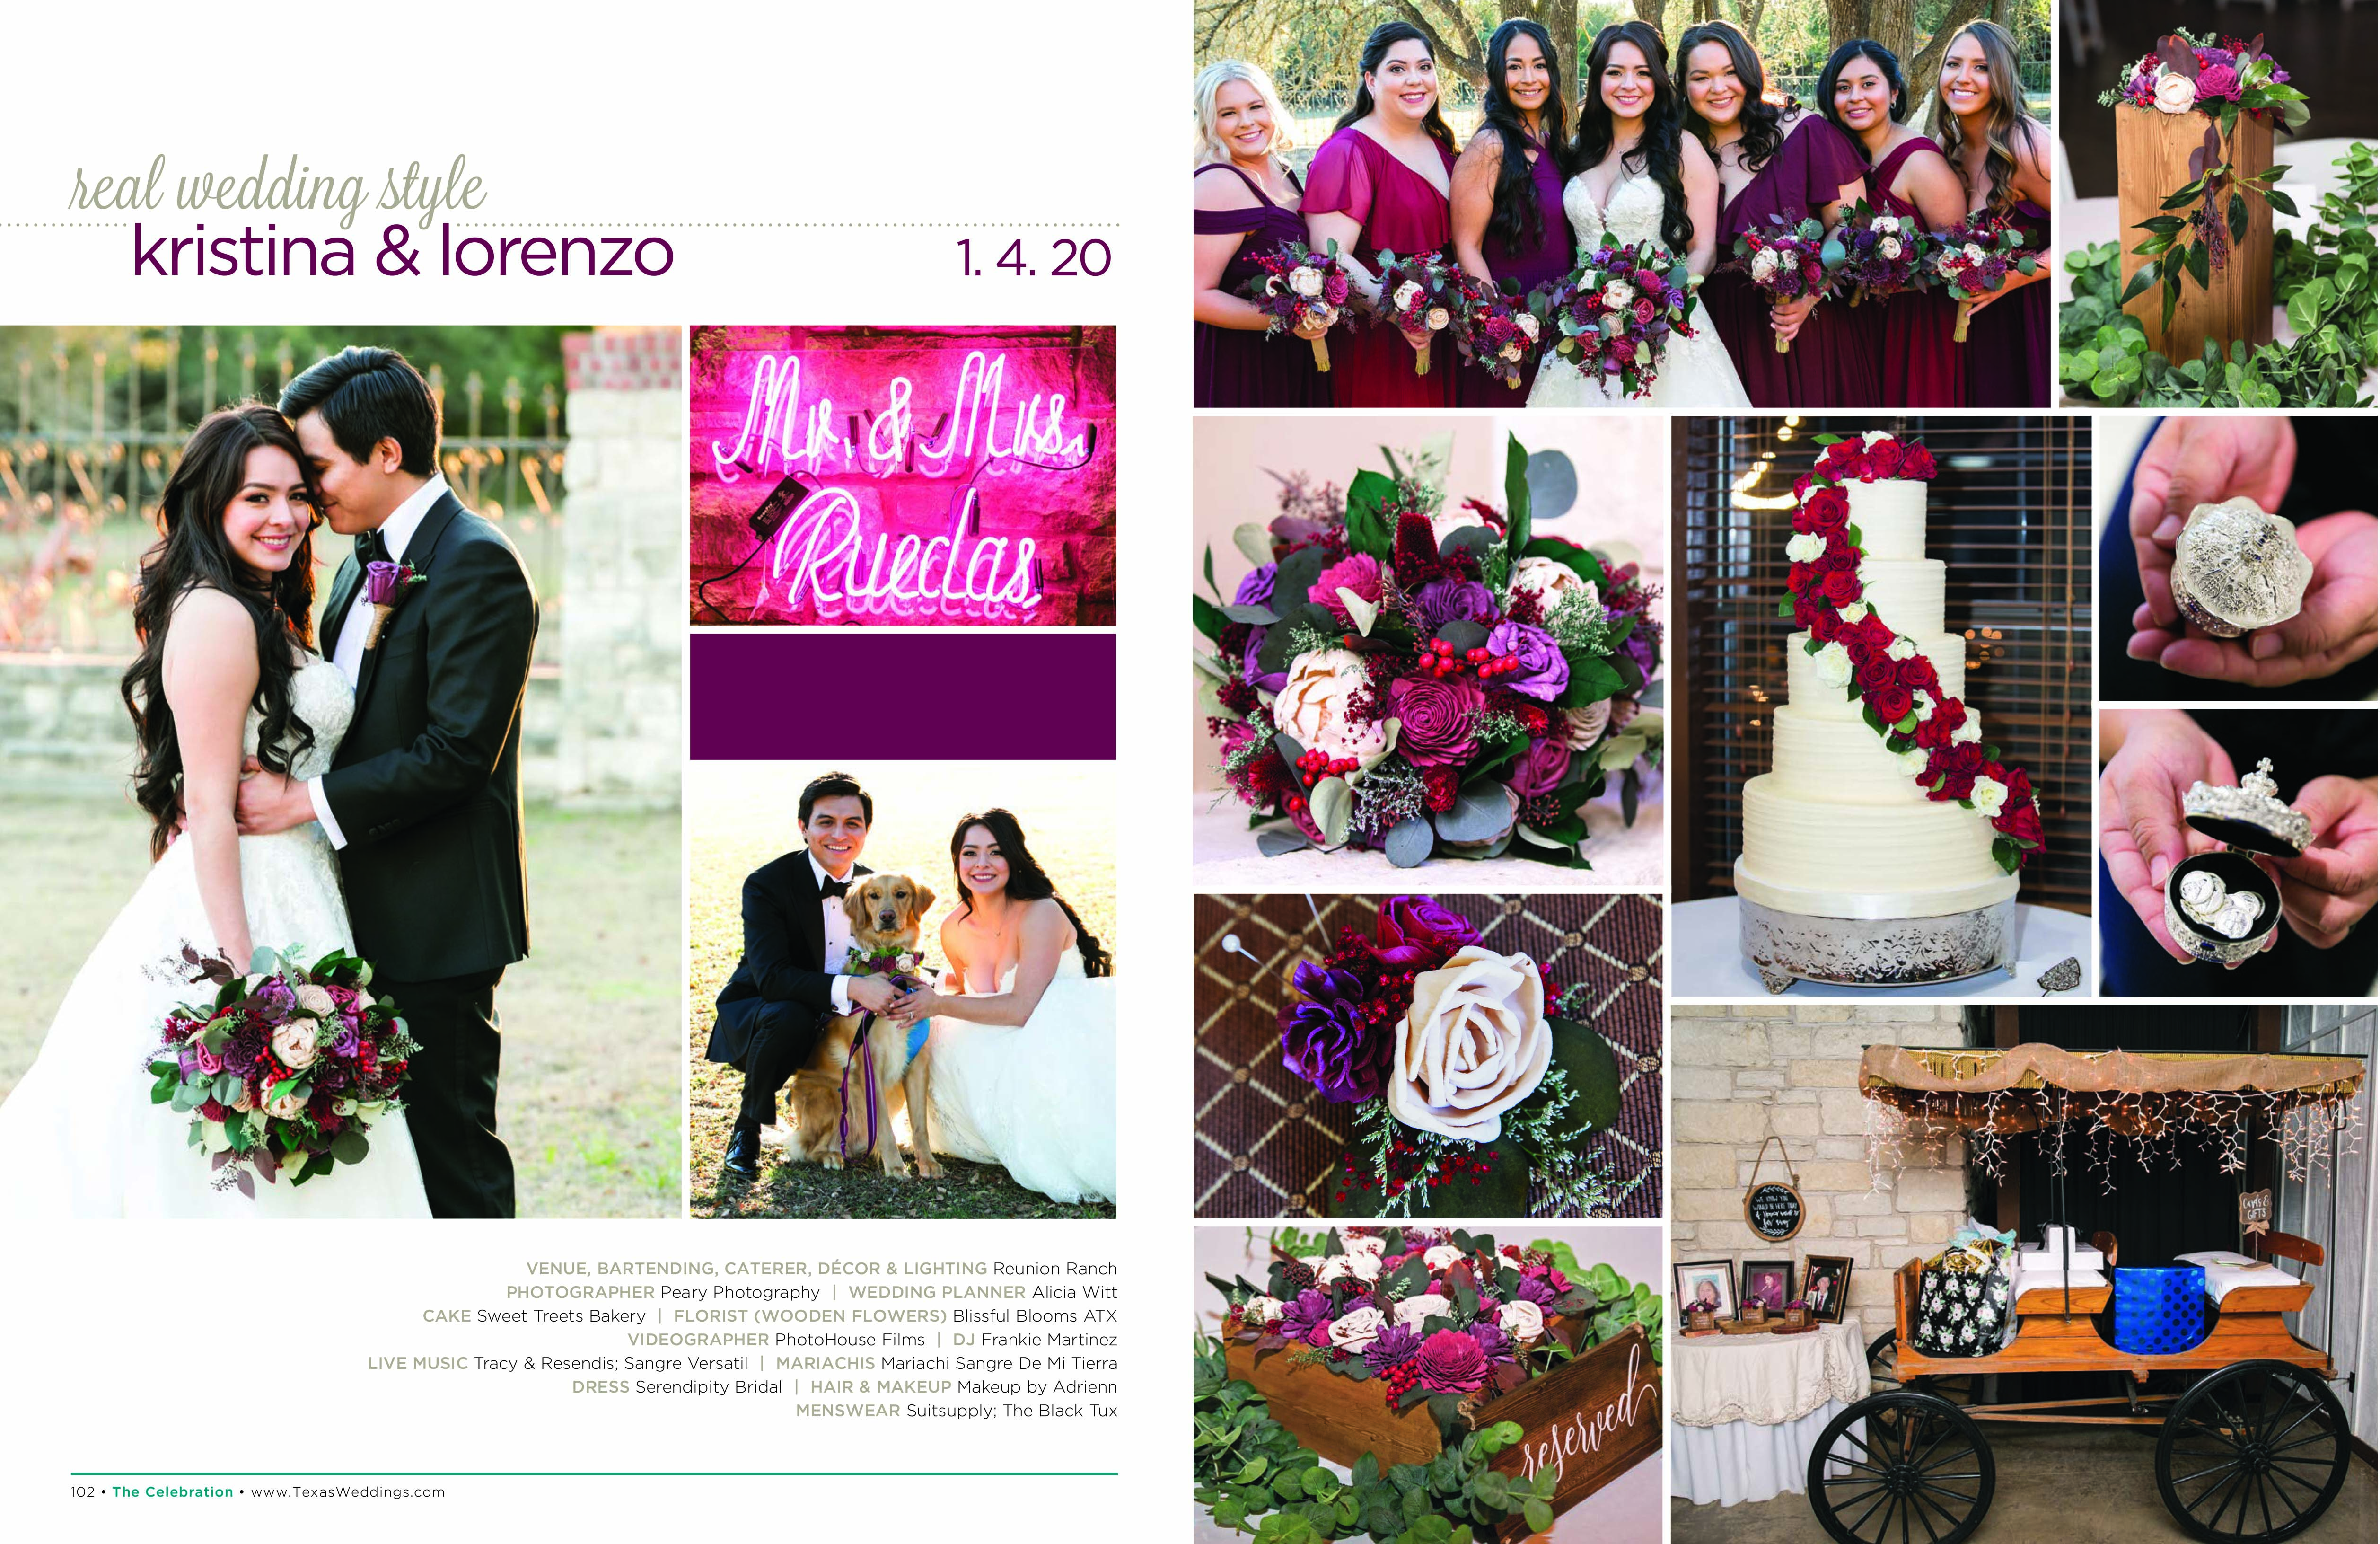 Kristina & Lorenzo in their Real Wedding Page in the Spring/Summer 2020 Texas Wedding Guide